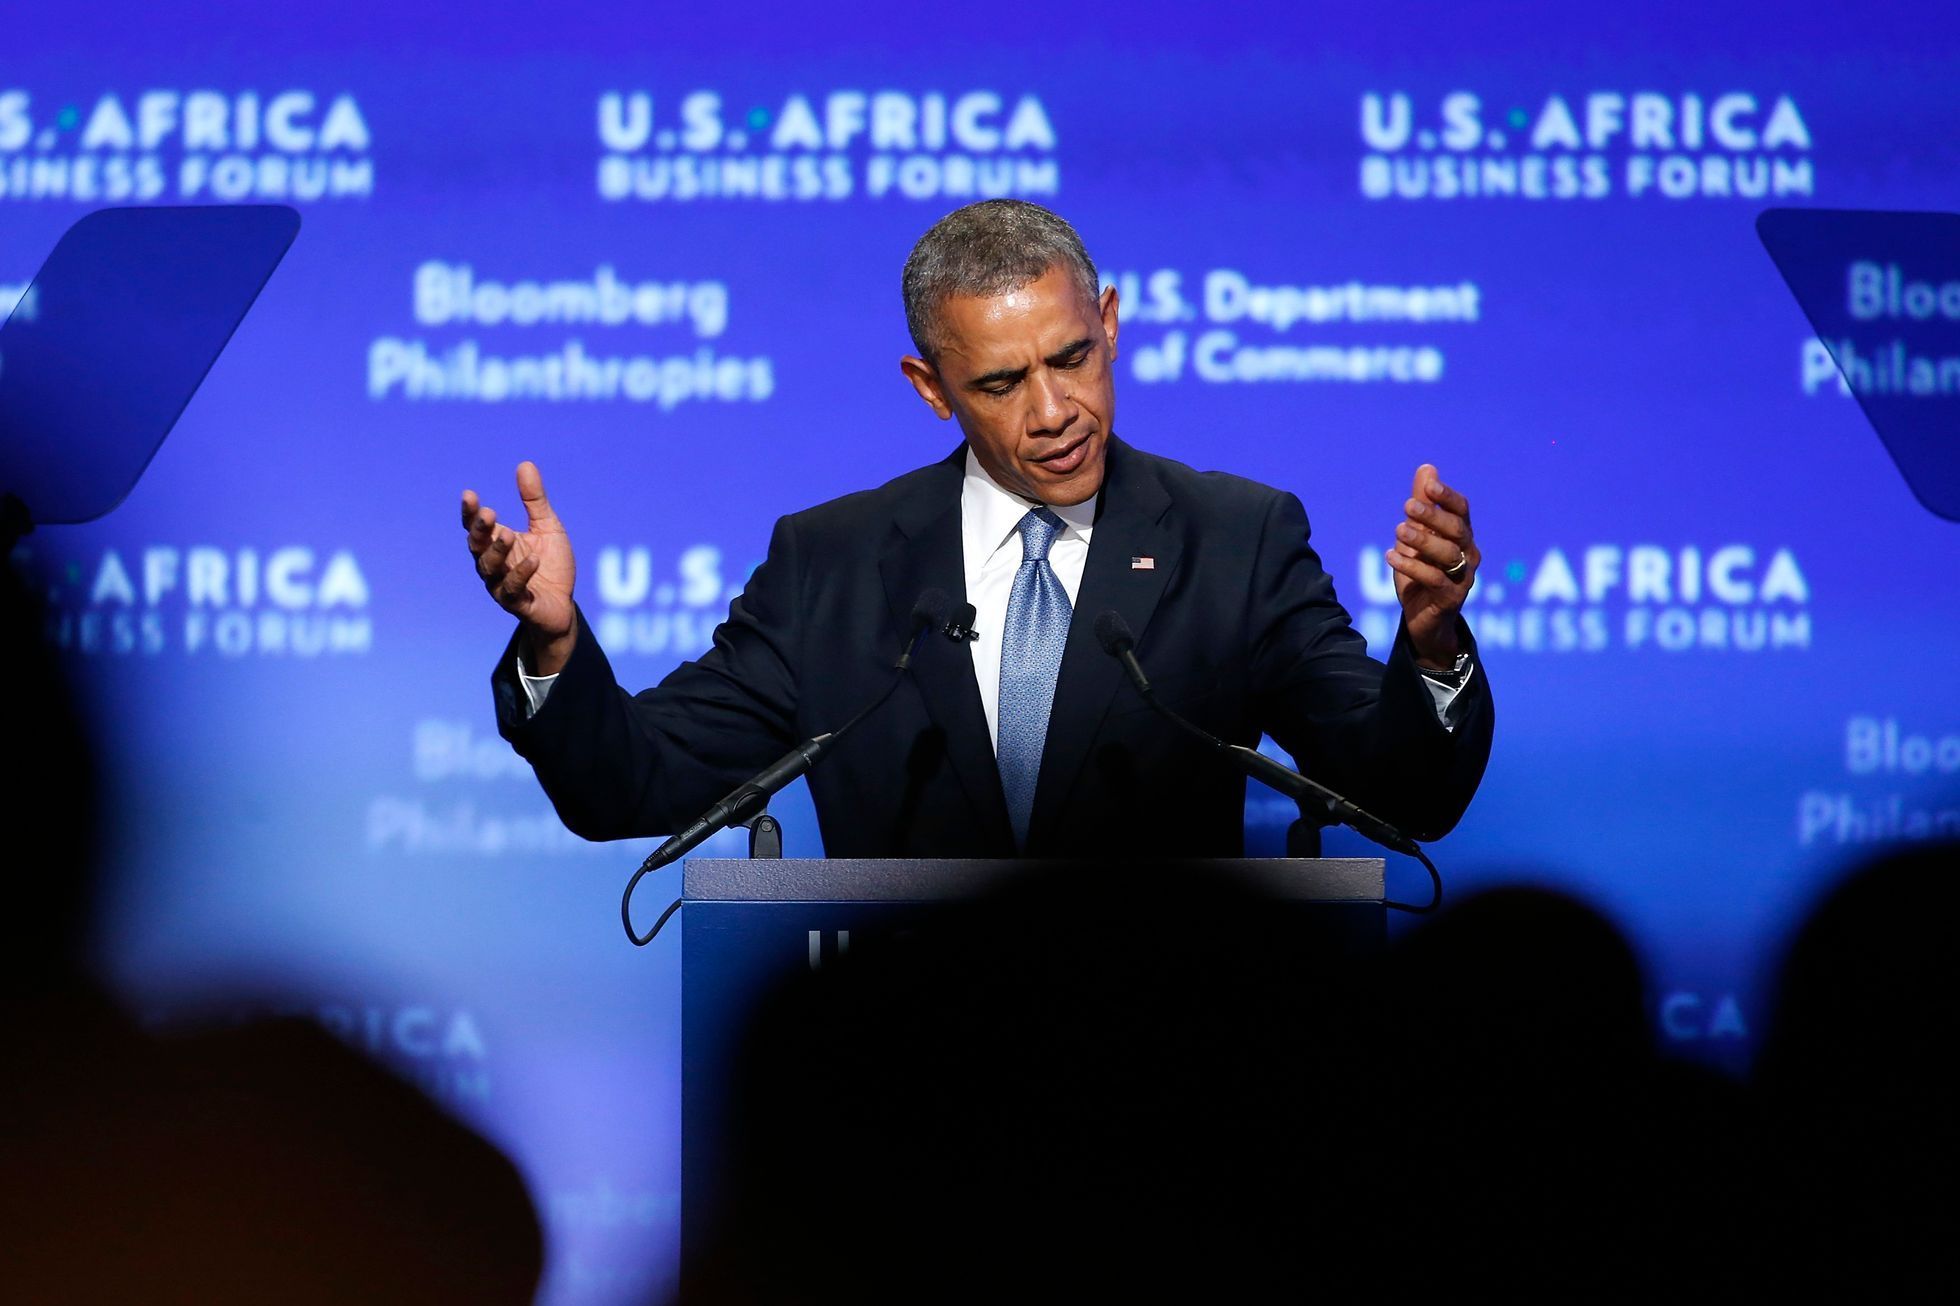 Obama takes the stage to address the U.S.-Africa Business Forum in Washington